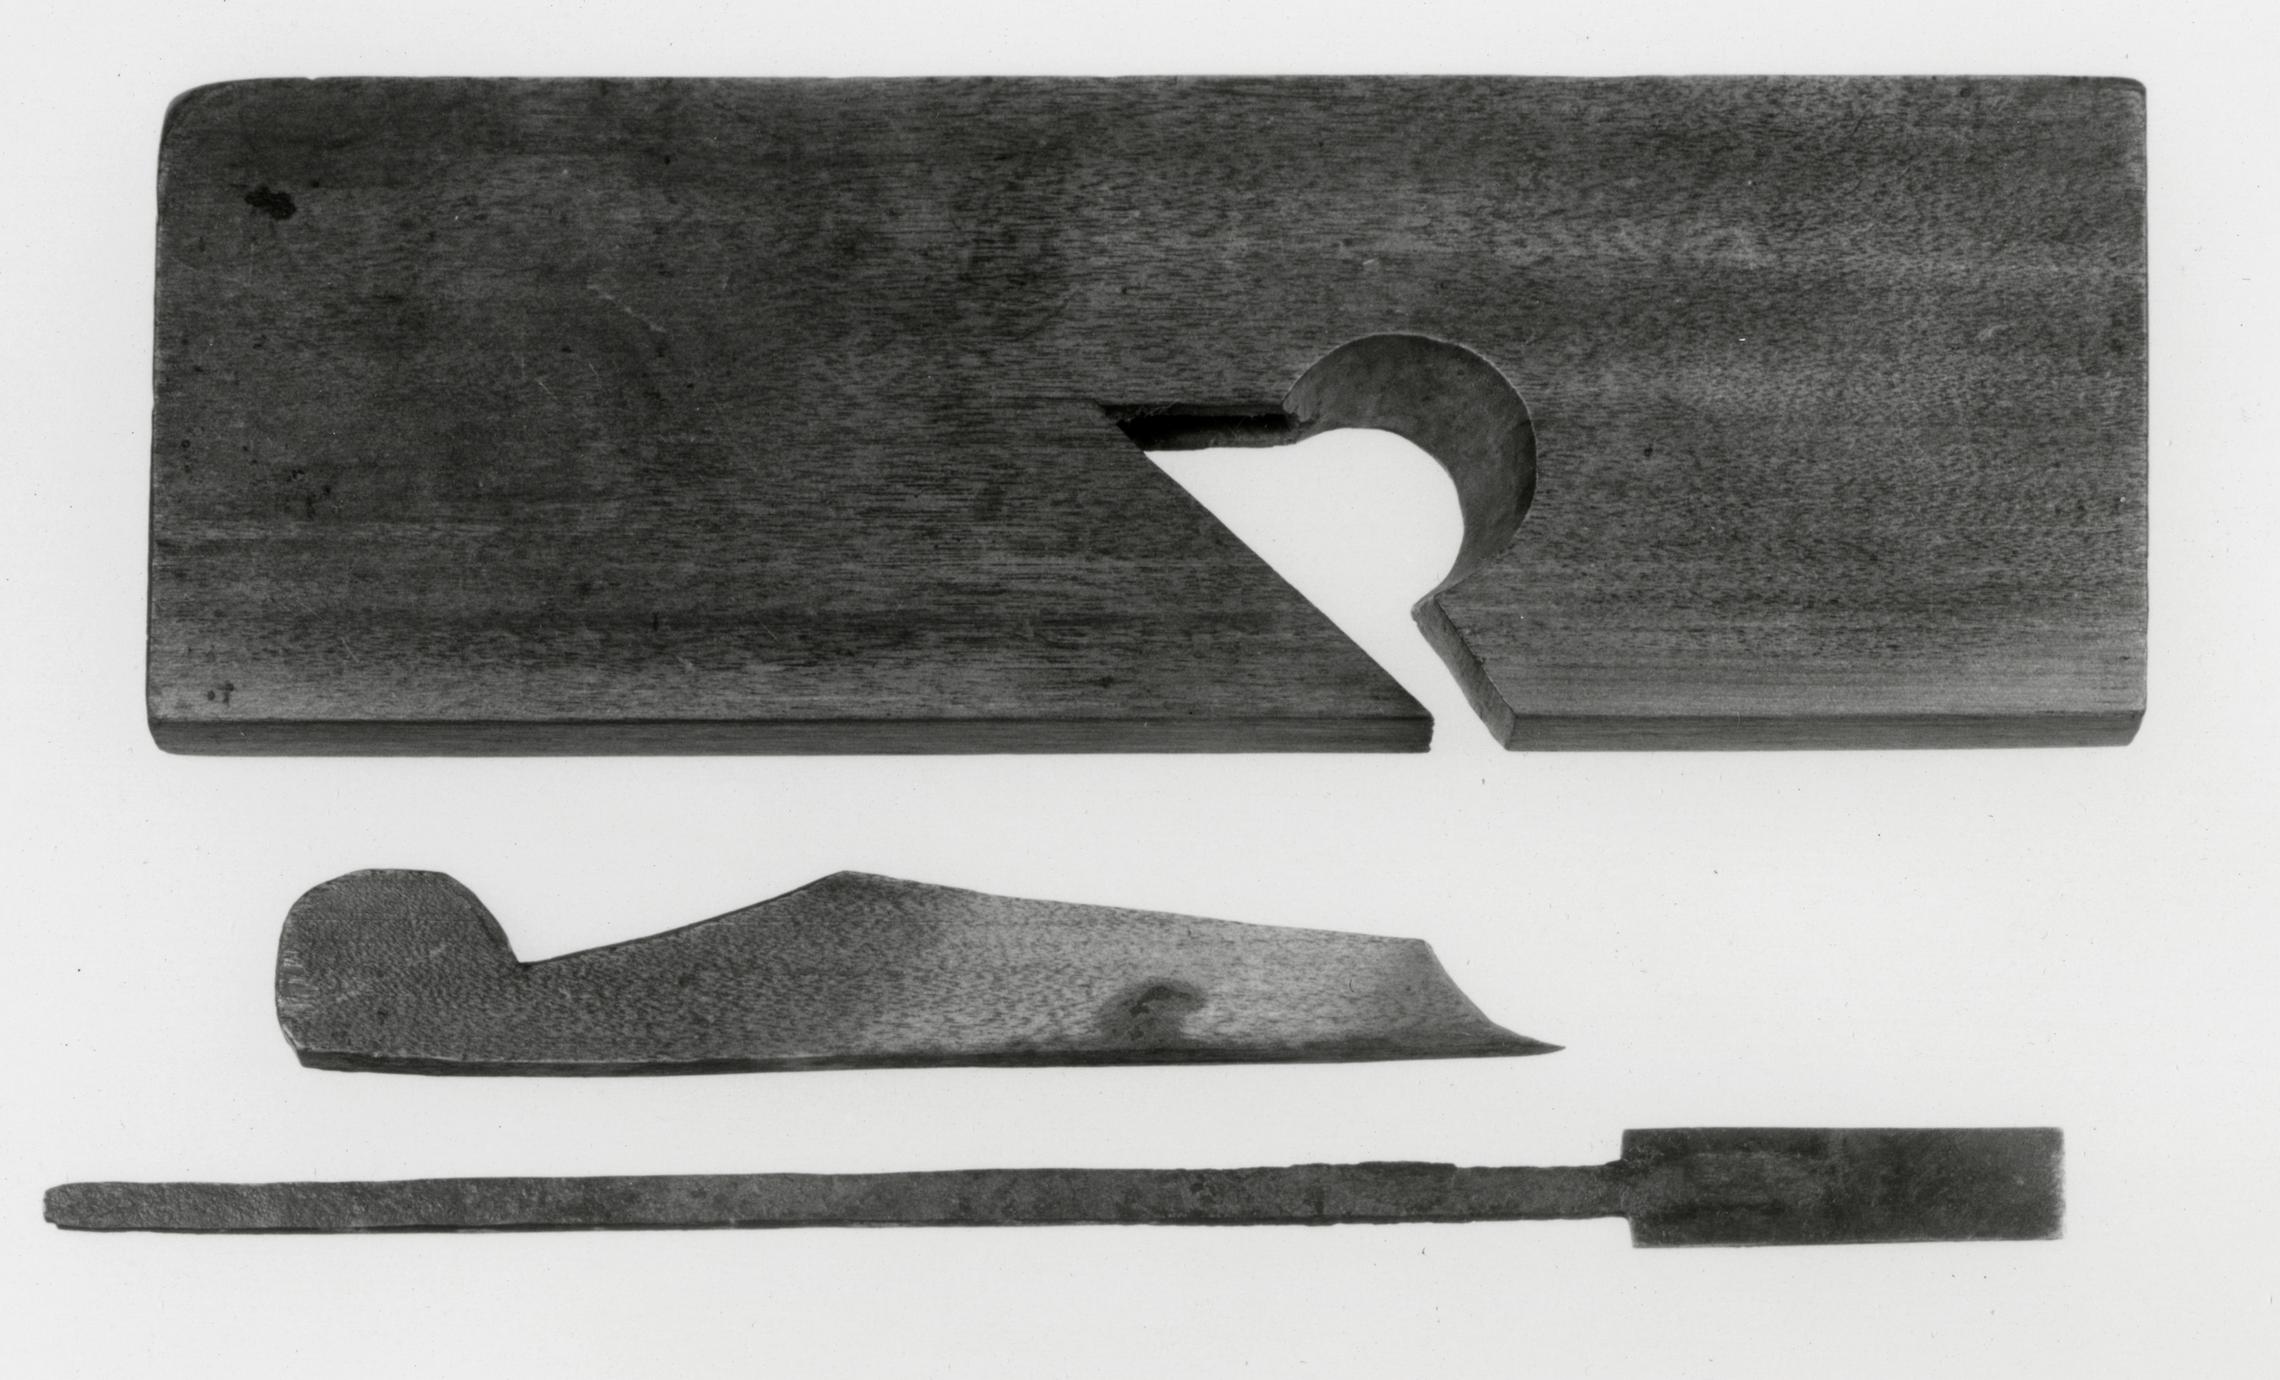 Black and white photograph of a square-mounted rabbet plane.